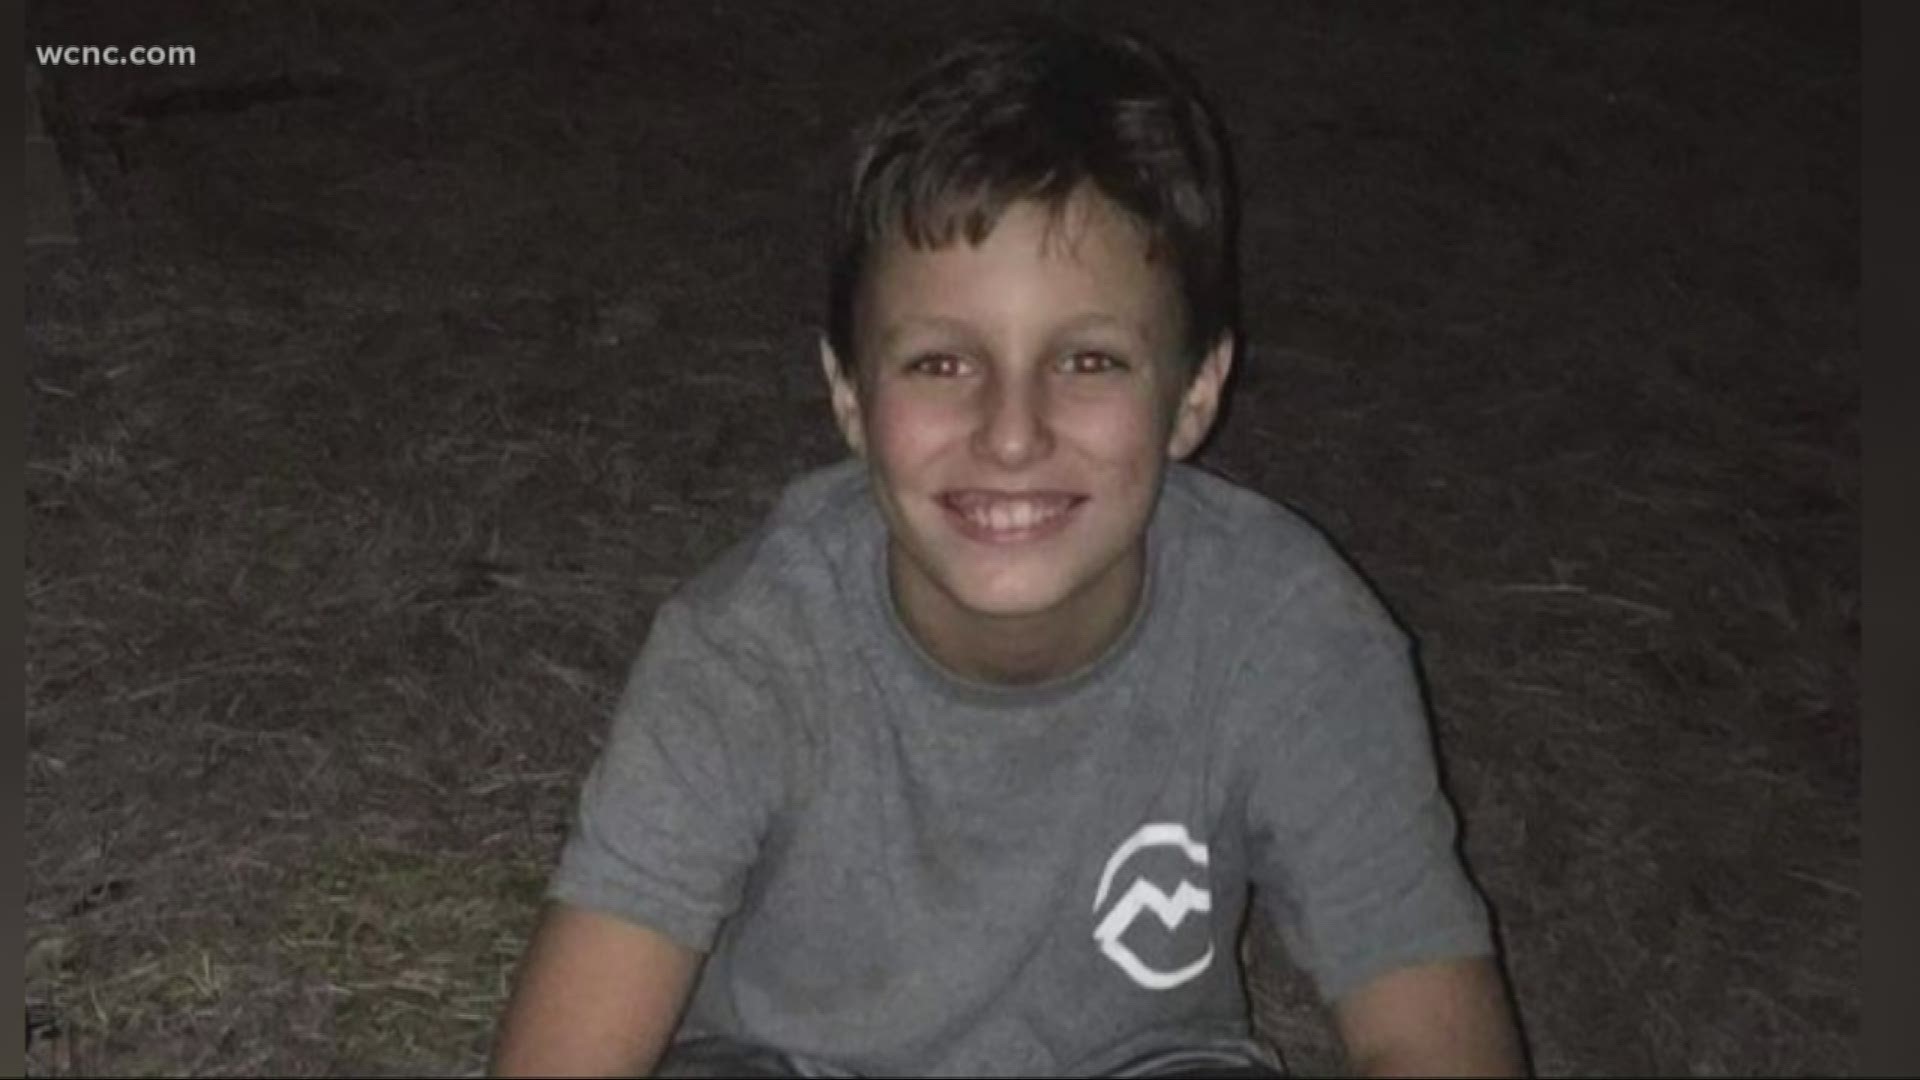 Noah Chambers was leaving a Trick-or-Treat event northwest of Greensboro when he was hit by a car. His father confirmed that the 11-year-old died days later.